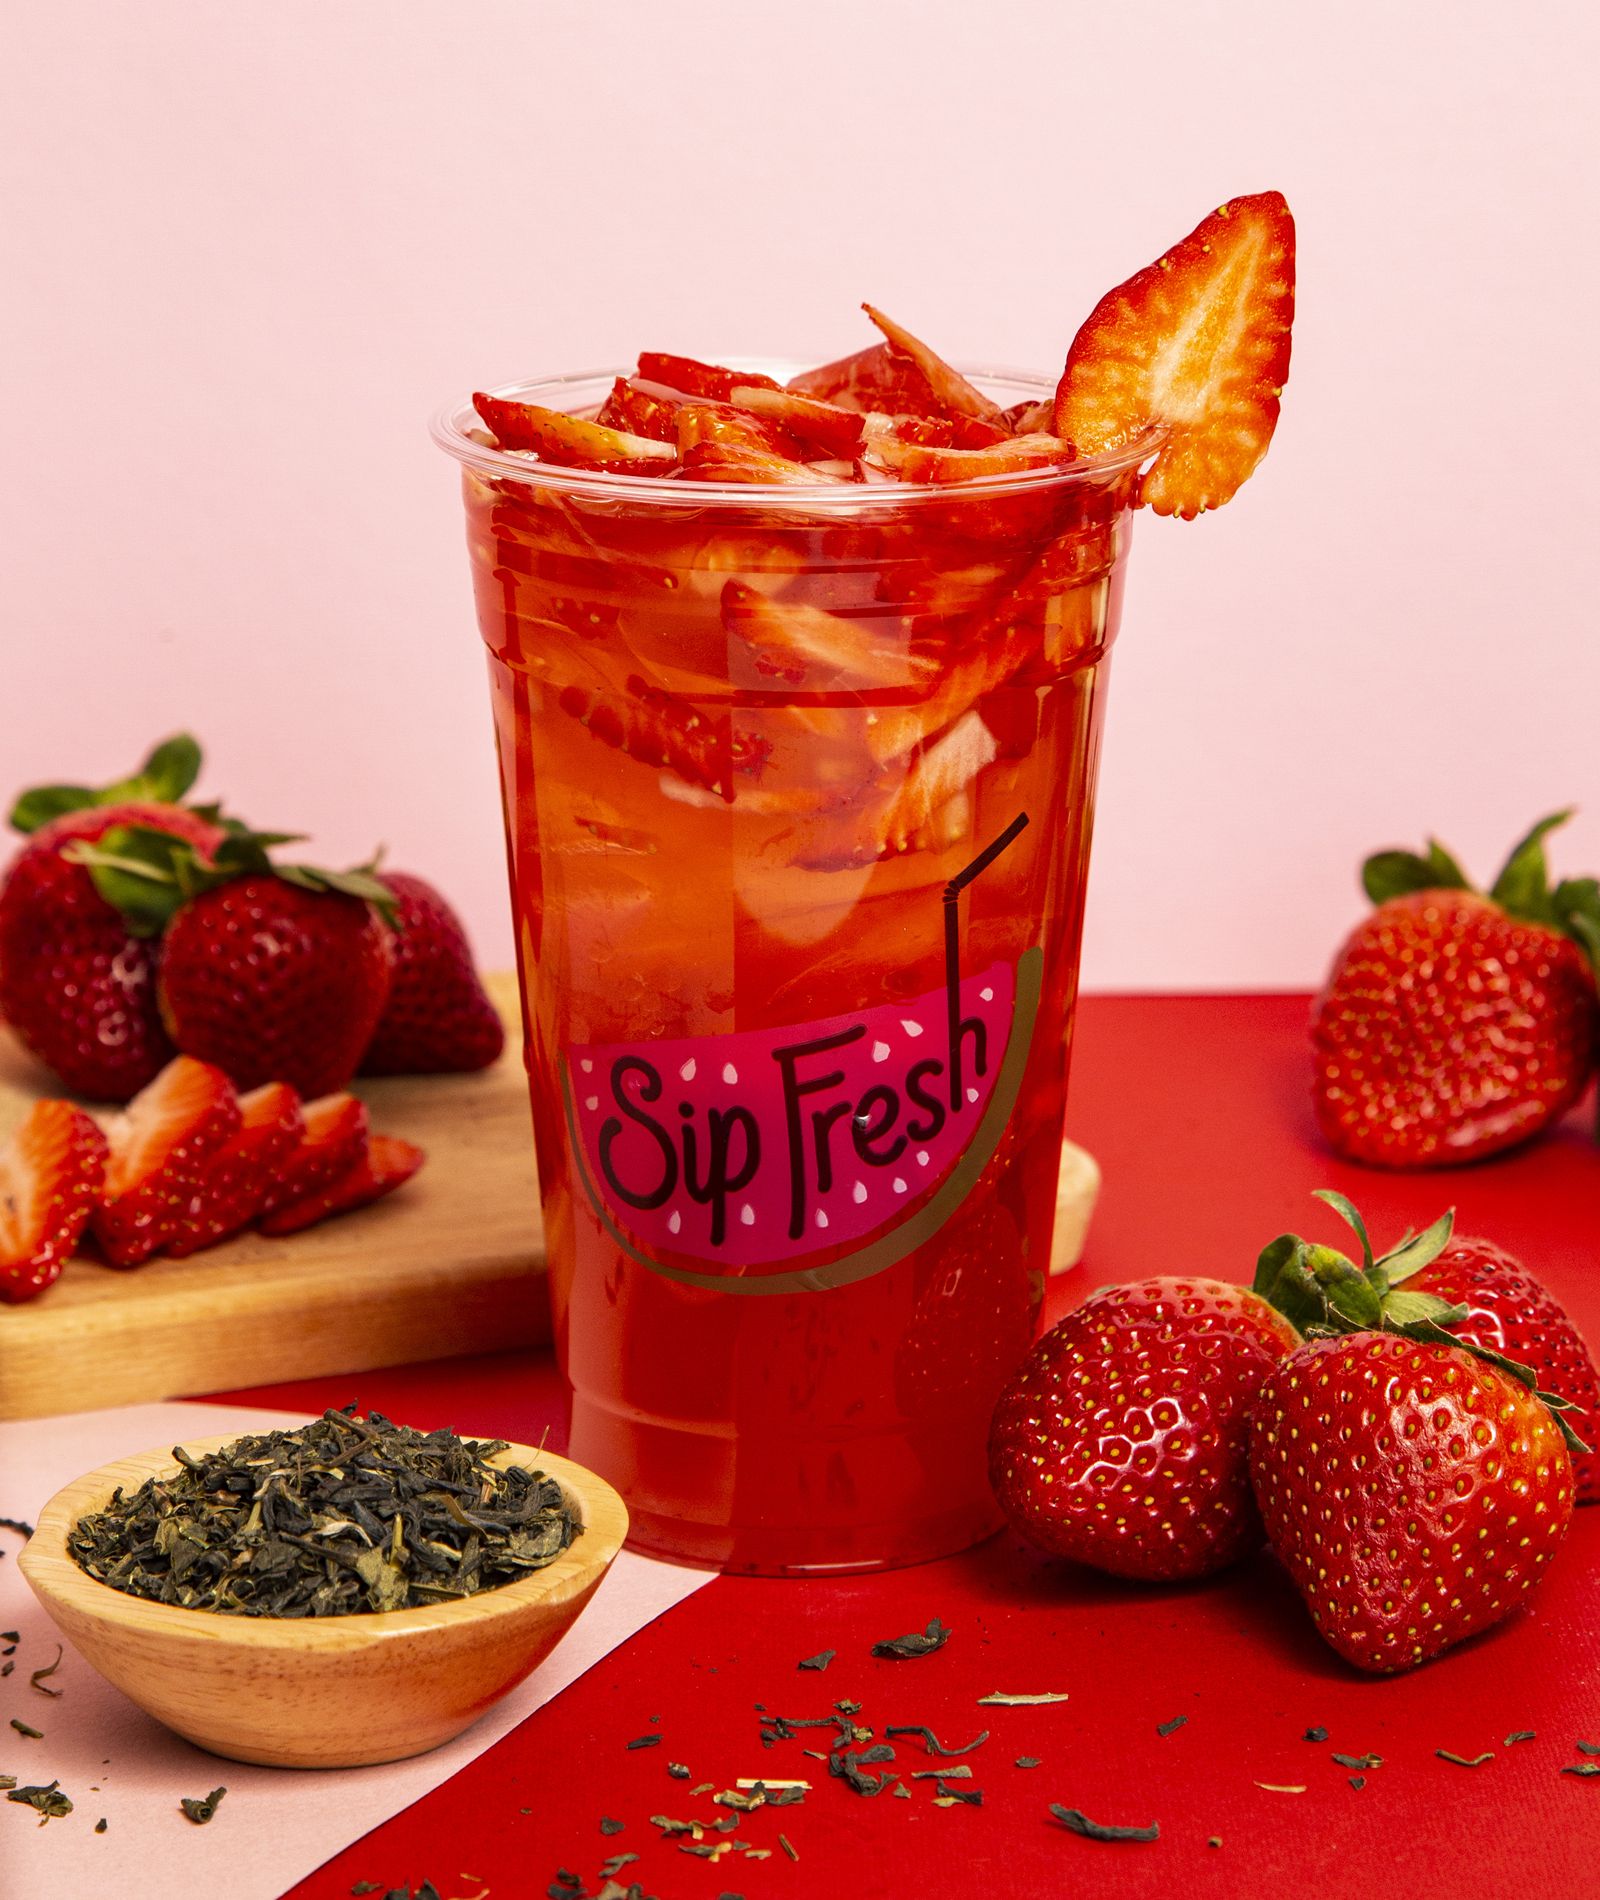 Sip Fresh, Deliciously Handcrafted, Fresh Fruit Beverage Concept, Launches Franchise Opportunity